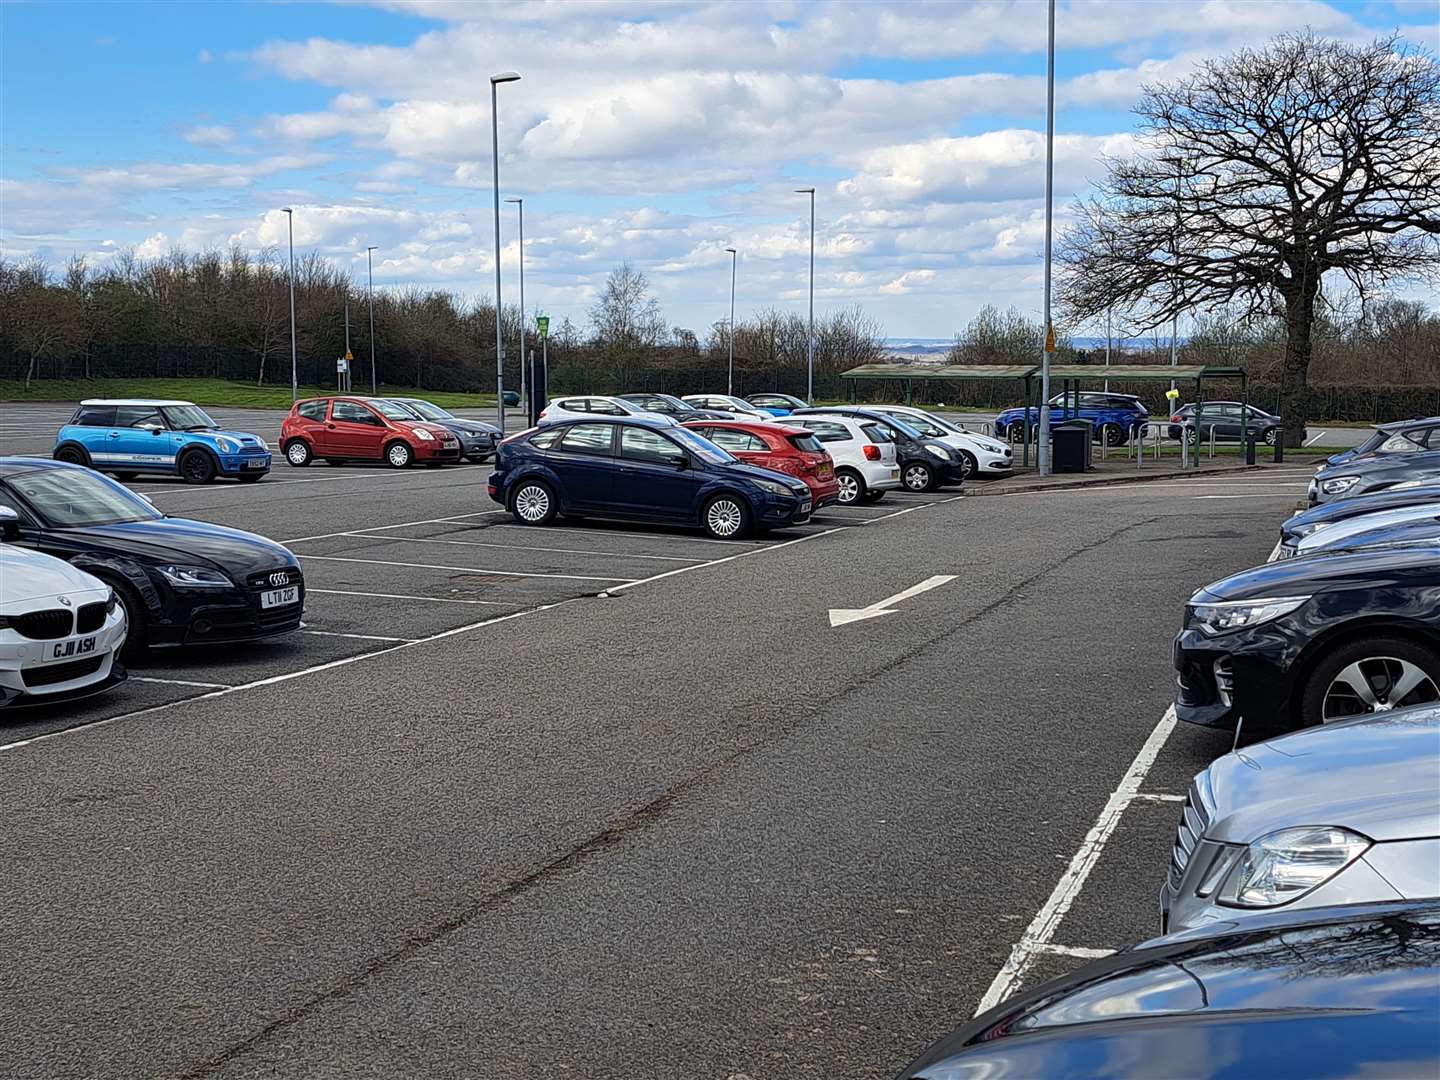 The 278-space car park could be closed after being plagued by nuisance car rallies